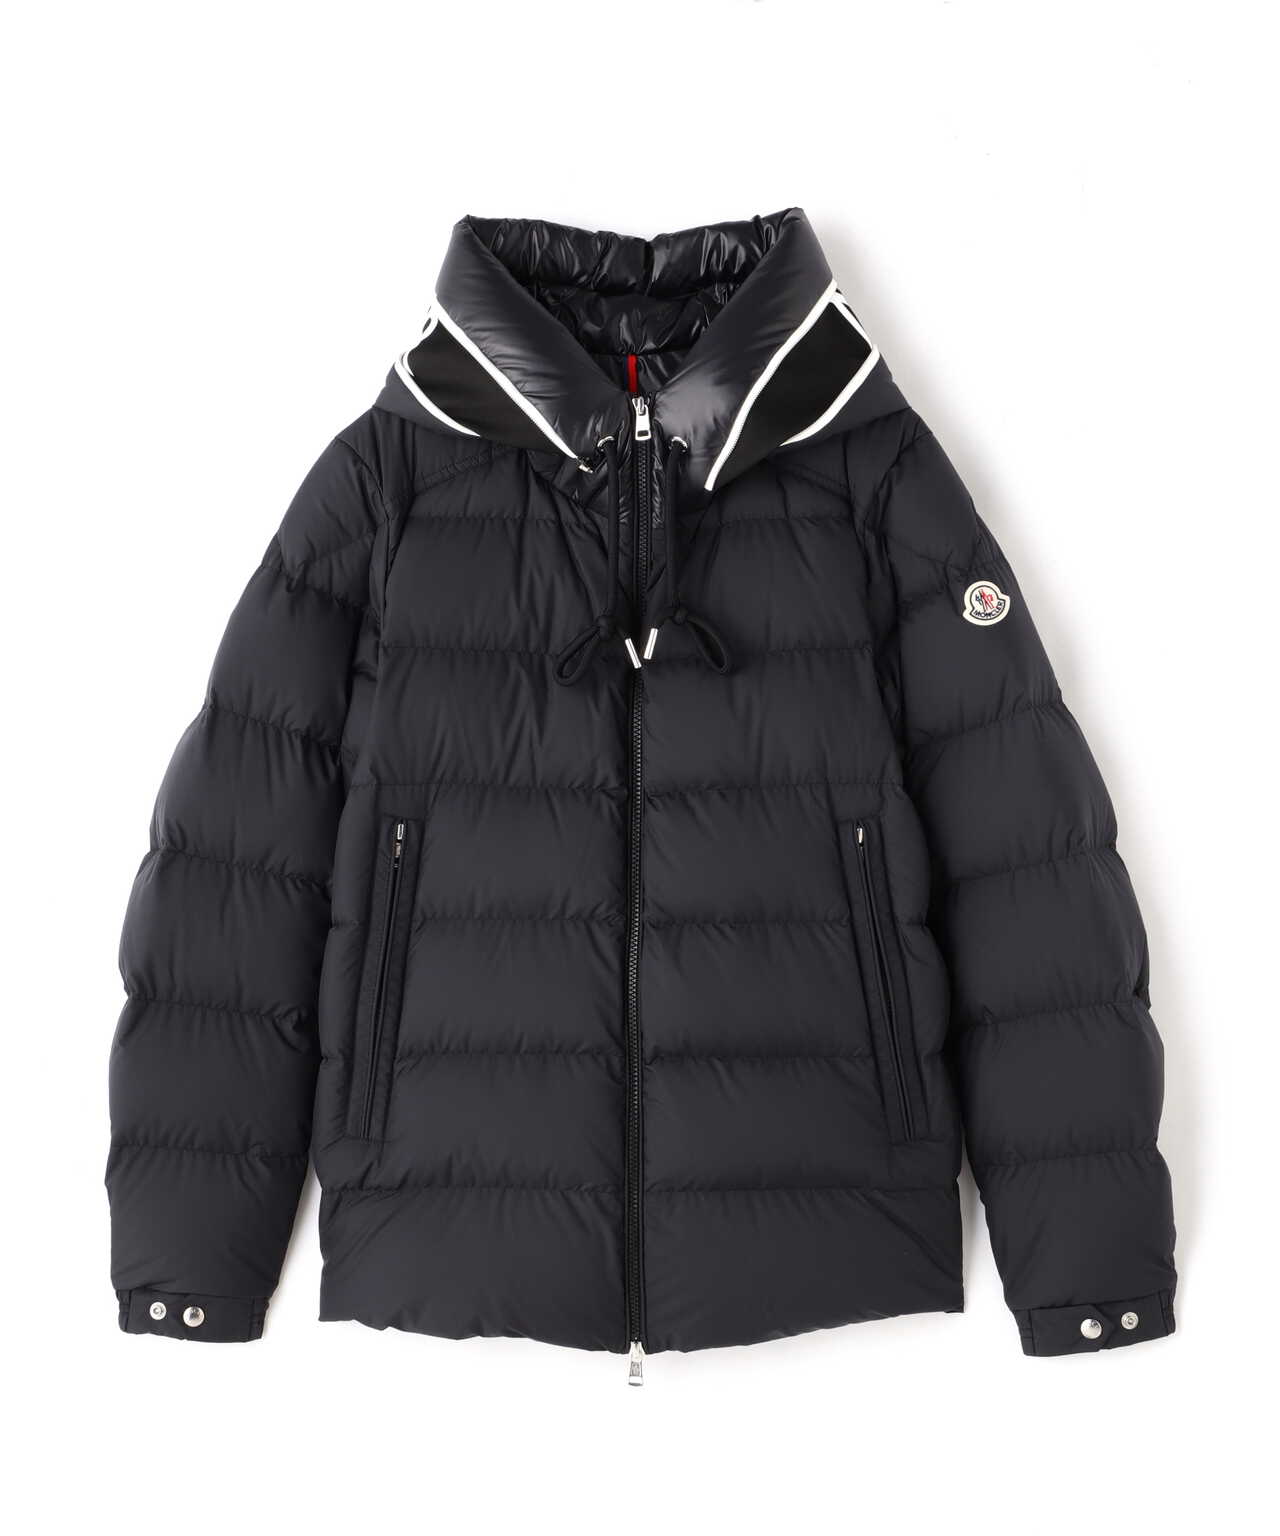 MONCLER/モンクレール/CARDERE JACKET/ダウンジャケット   LHP